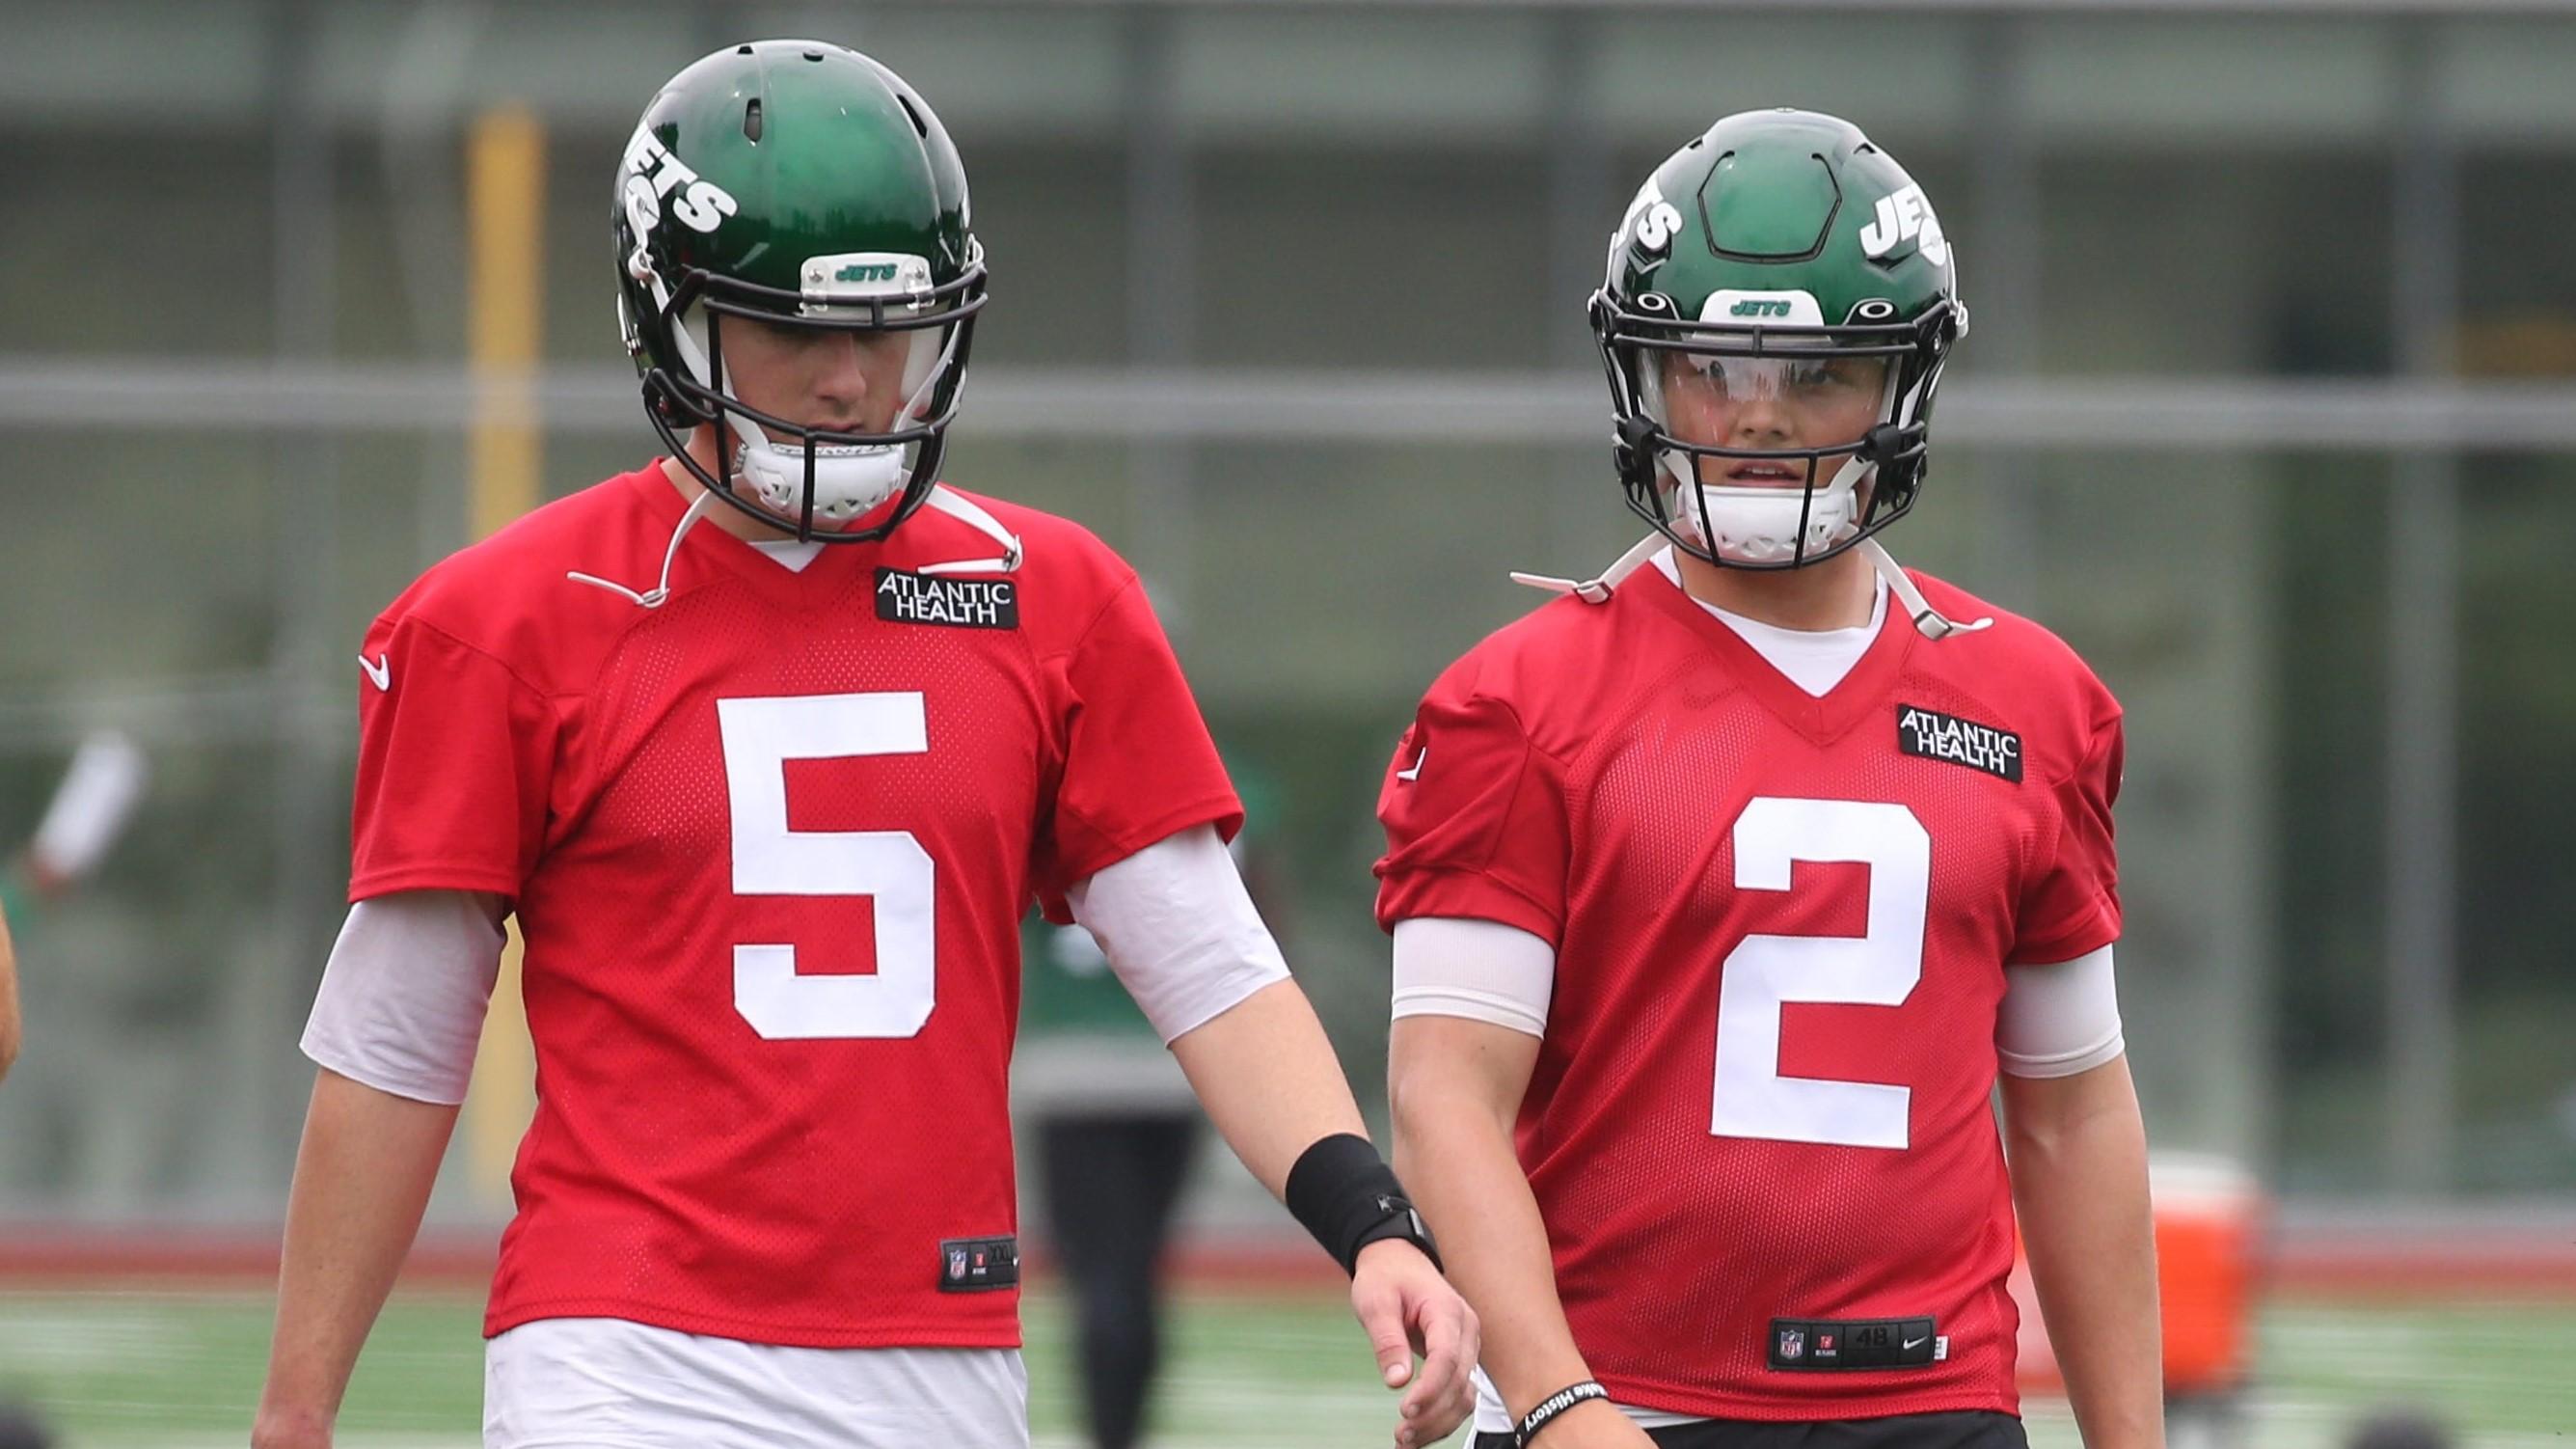 Quarterbacks Mike White and Zach Wilson participate in practice as the New York Jets held OTA's this morning at their practice facility in Florham Park, NJ on June 4, 2021. The New York Jets Held Ota S This Morning At Their Practice Facility In Florham Park Nj On June 4 2021 / Chris Pedota, NorthJersey.com via Imagn Content Services, LLC